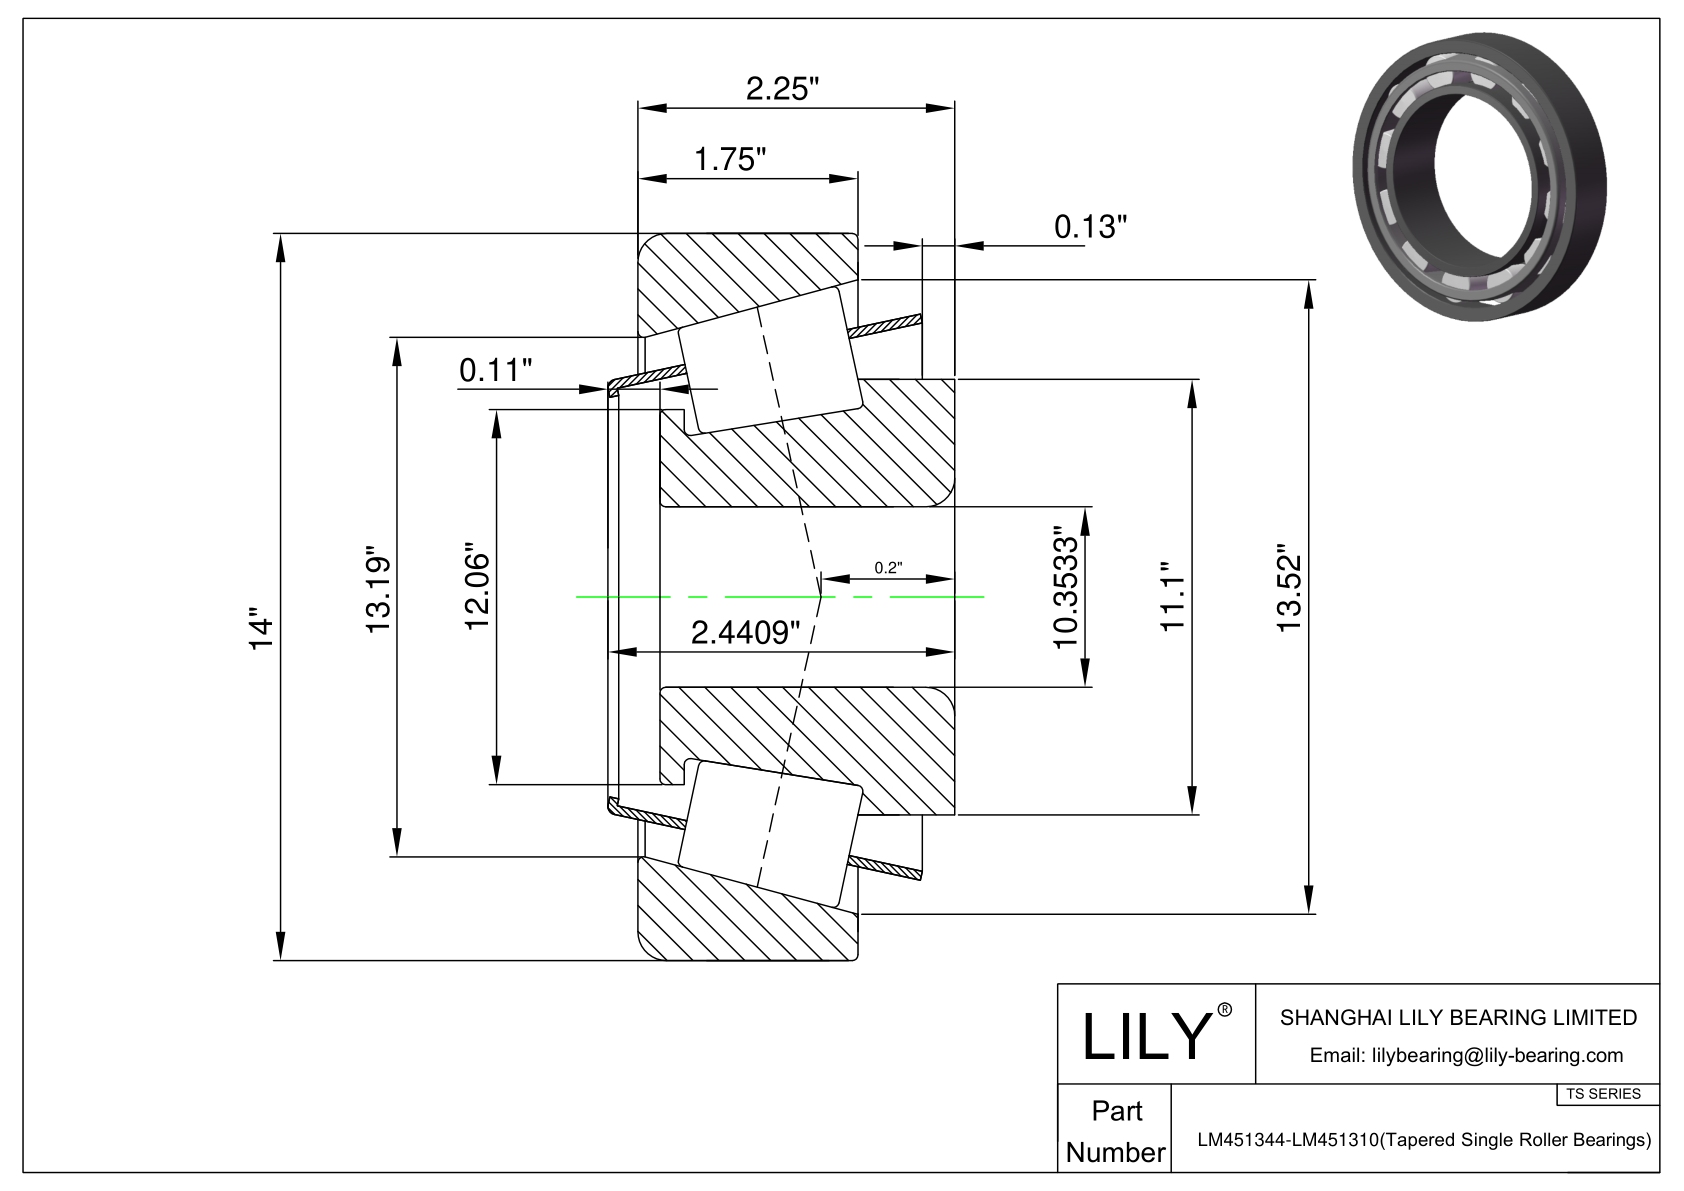 LM451344-LM451310 TS (Tapered Single Roller Bearings) (Imperial) cad drawing